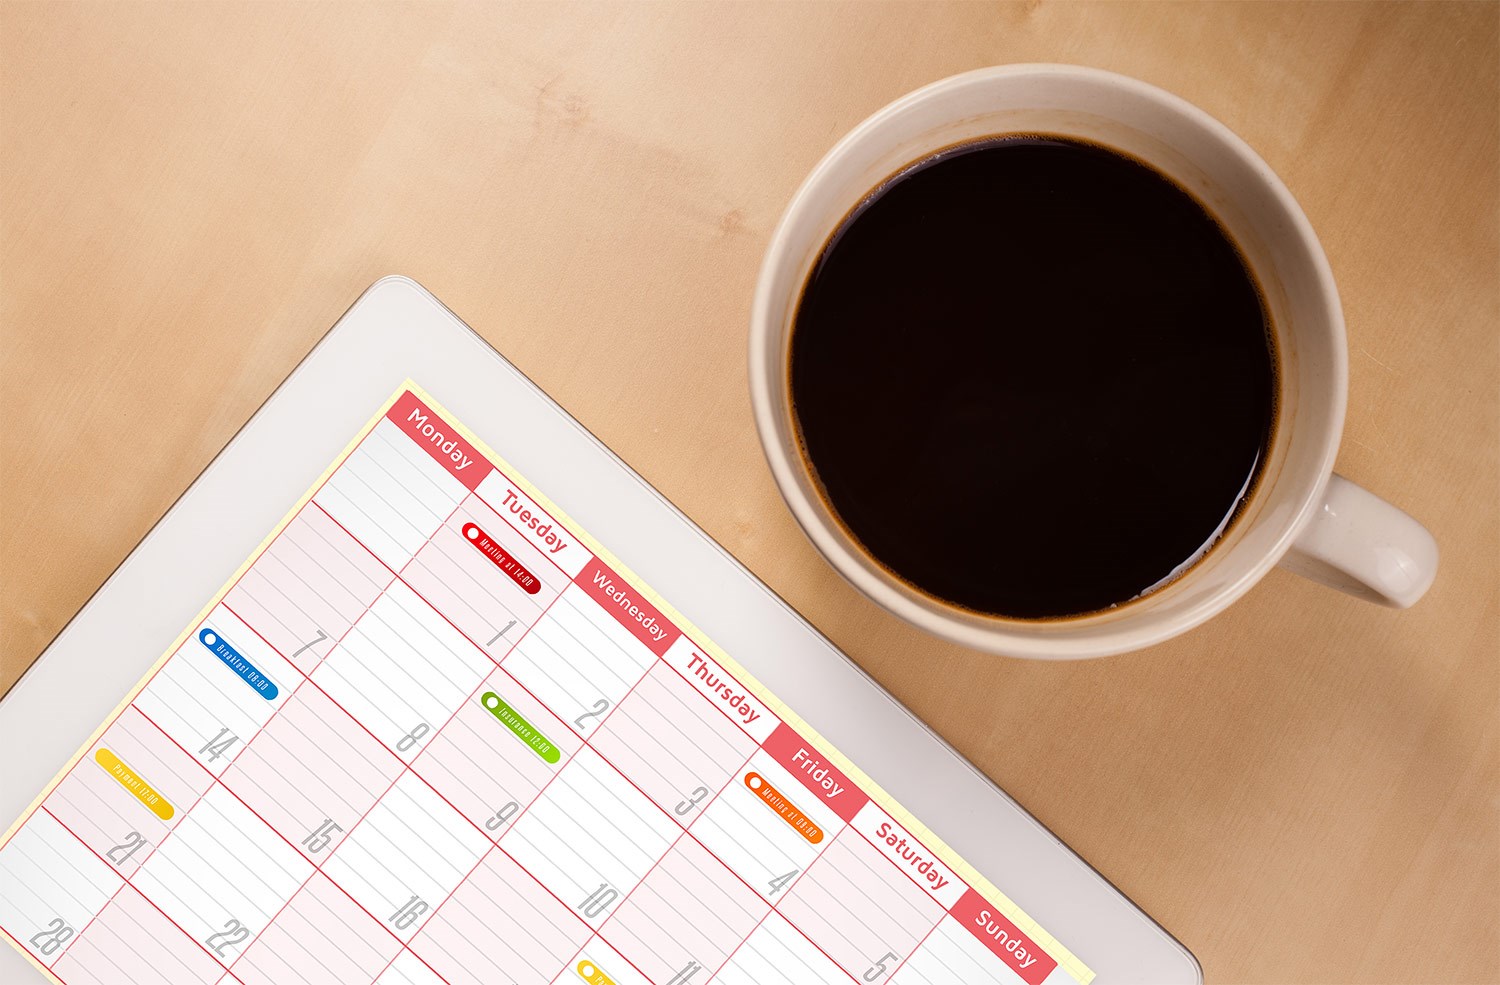 Image of coffee cup filled with coffee sitting on desk next to calendar with days of the month and different colors coded on each day.